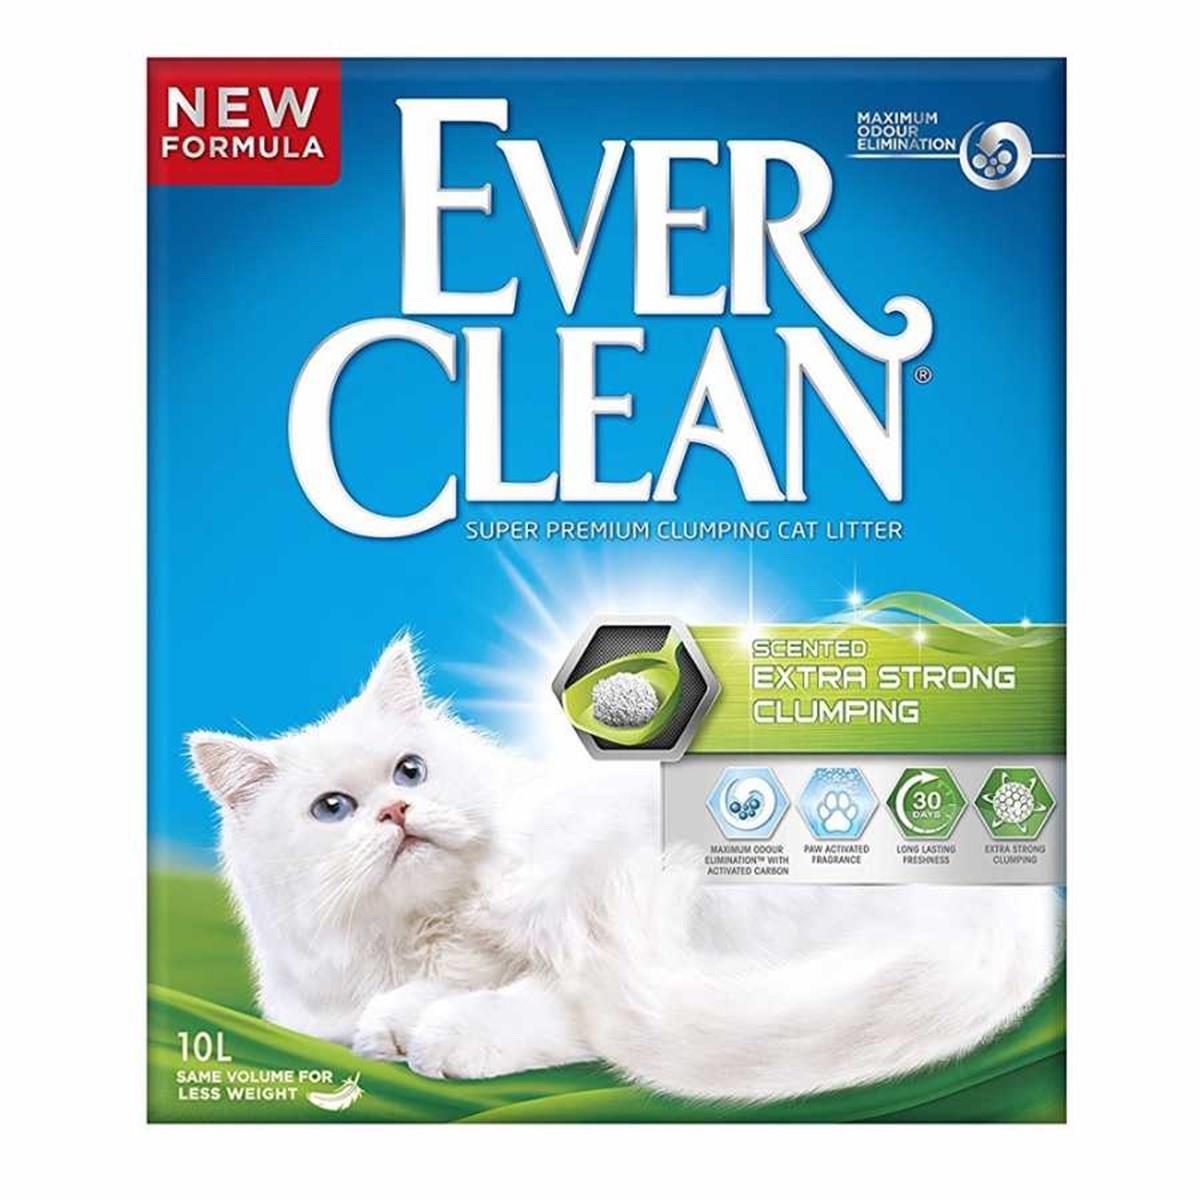 Ever Clean Extra Strong Clumping Scented Kedi Kumu 6 LT